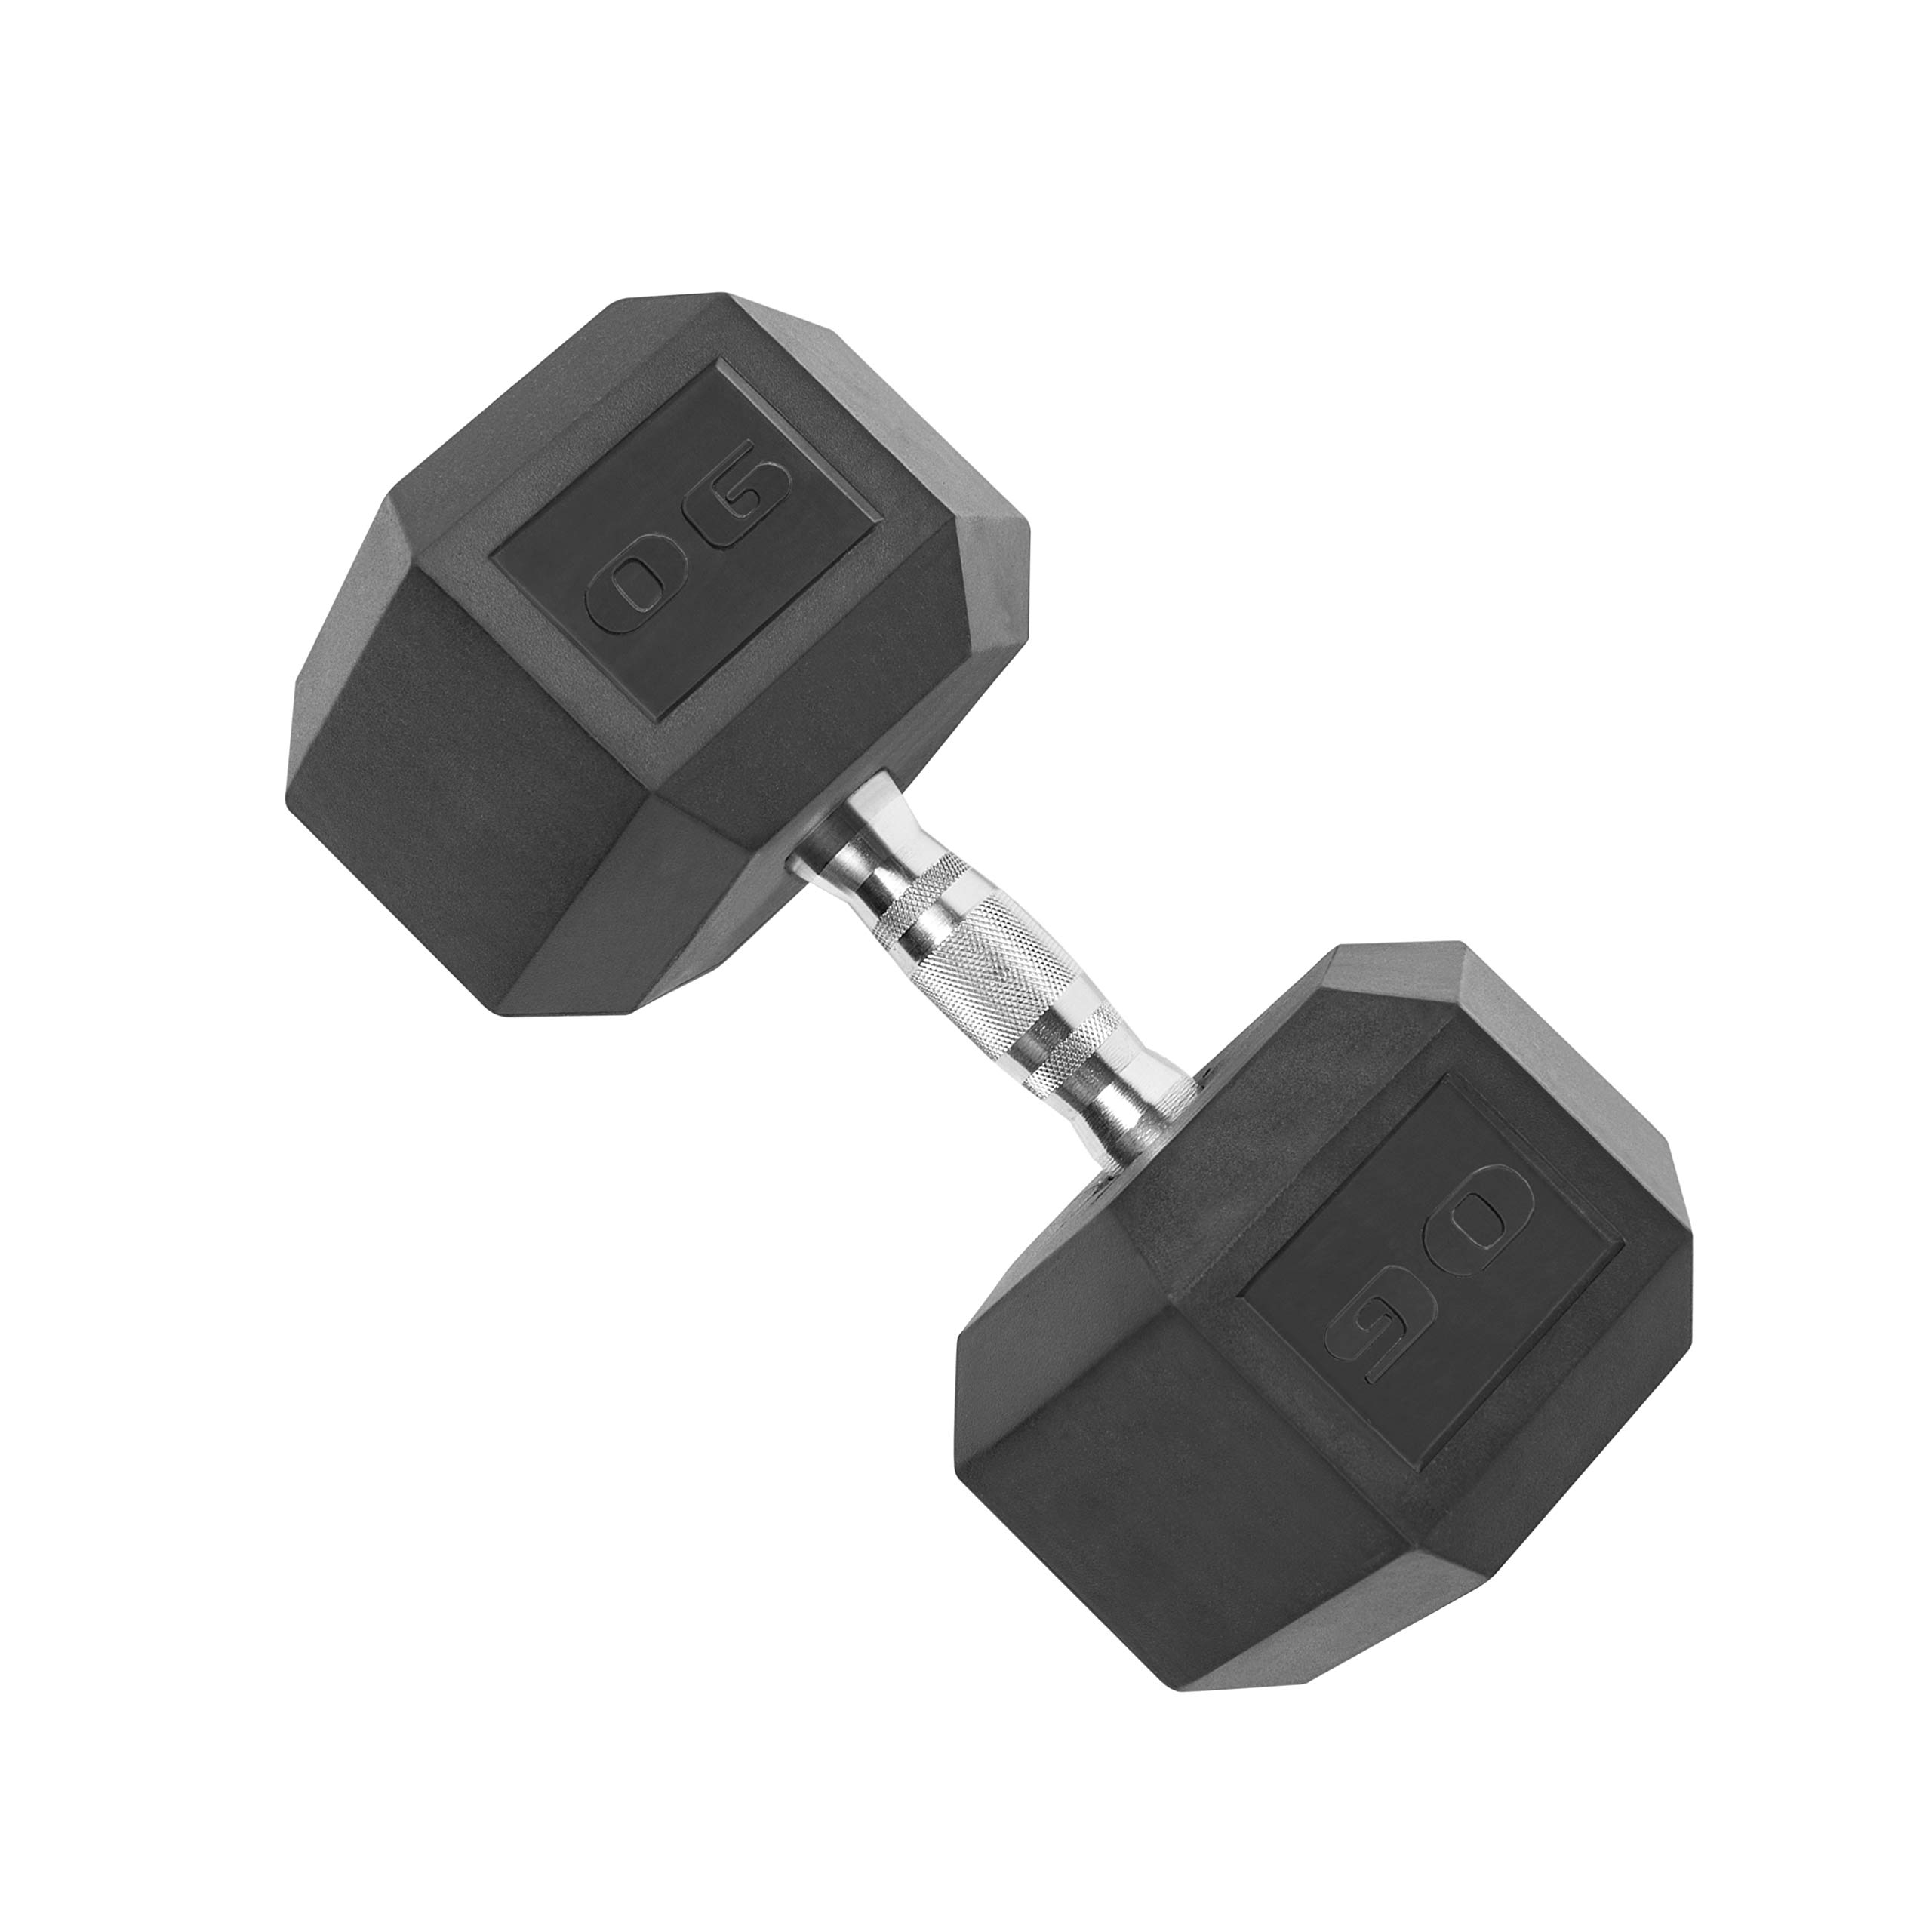 Cap Barbell cap 90 LB coated Hex Dumbbell Weight, New Edition, Black, (SDRIS-90)